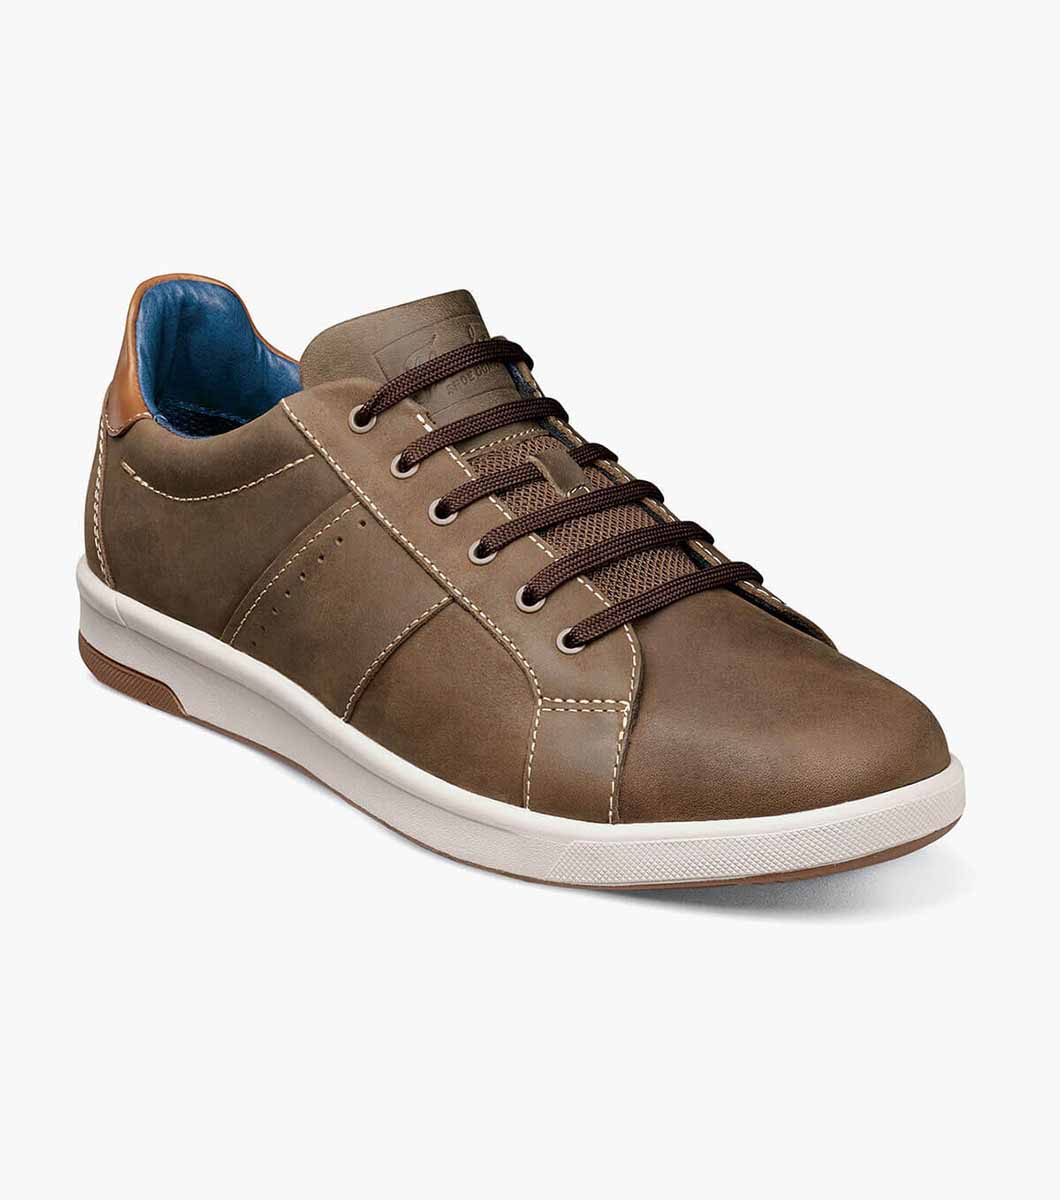 cancer Acquiesce No way Crossover Lace To Toe Sneaker Men's Casual Shoes | Florsheim.com